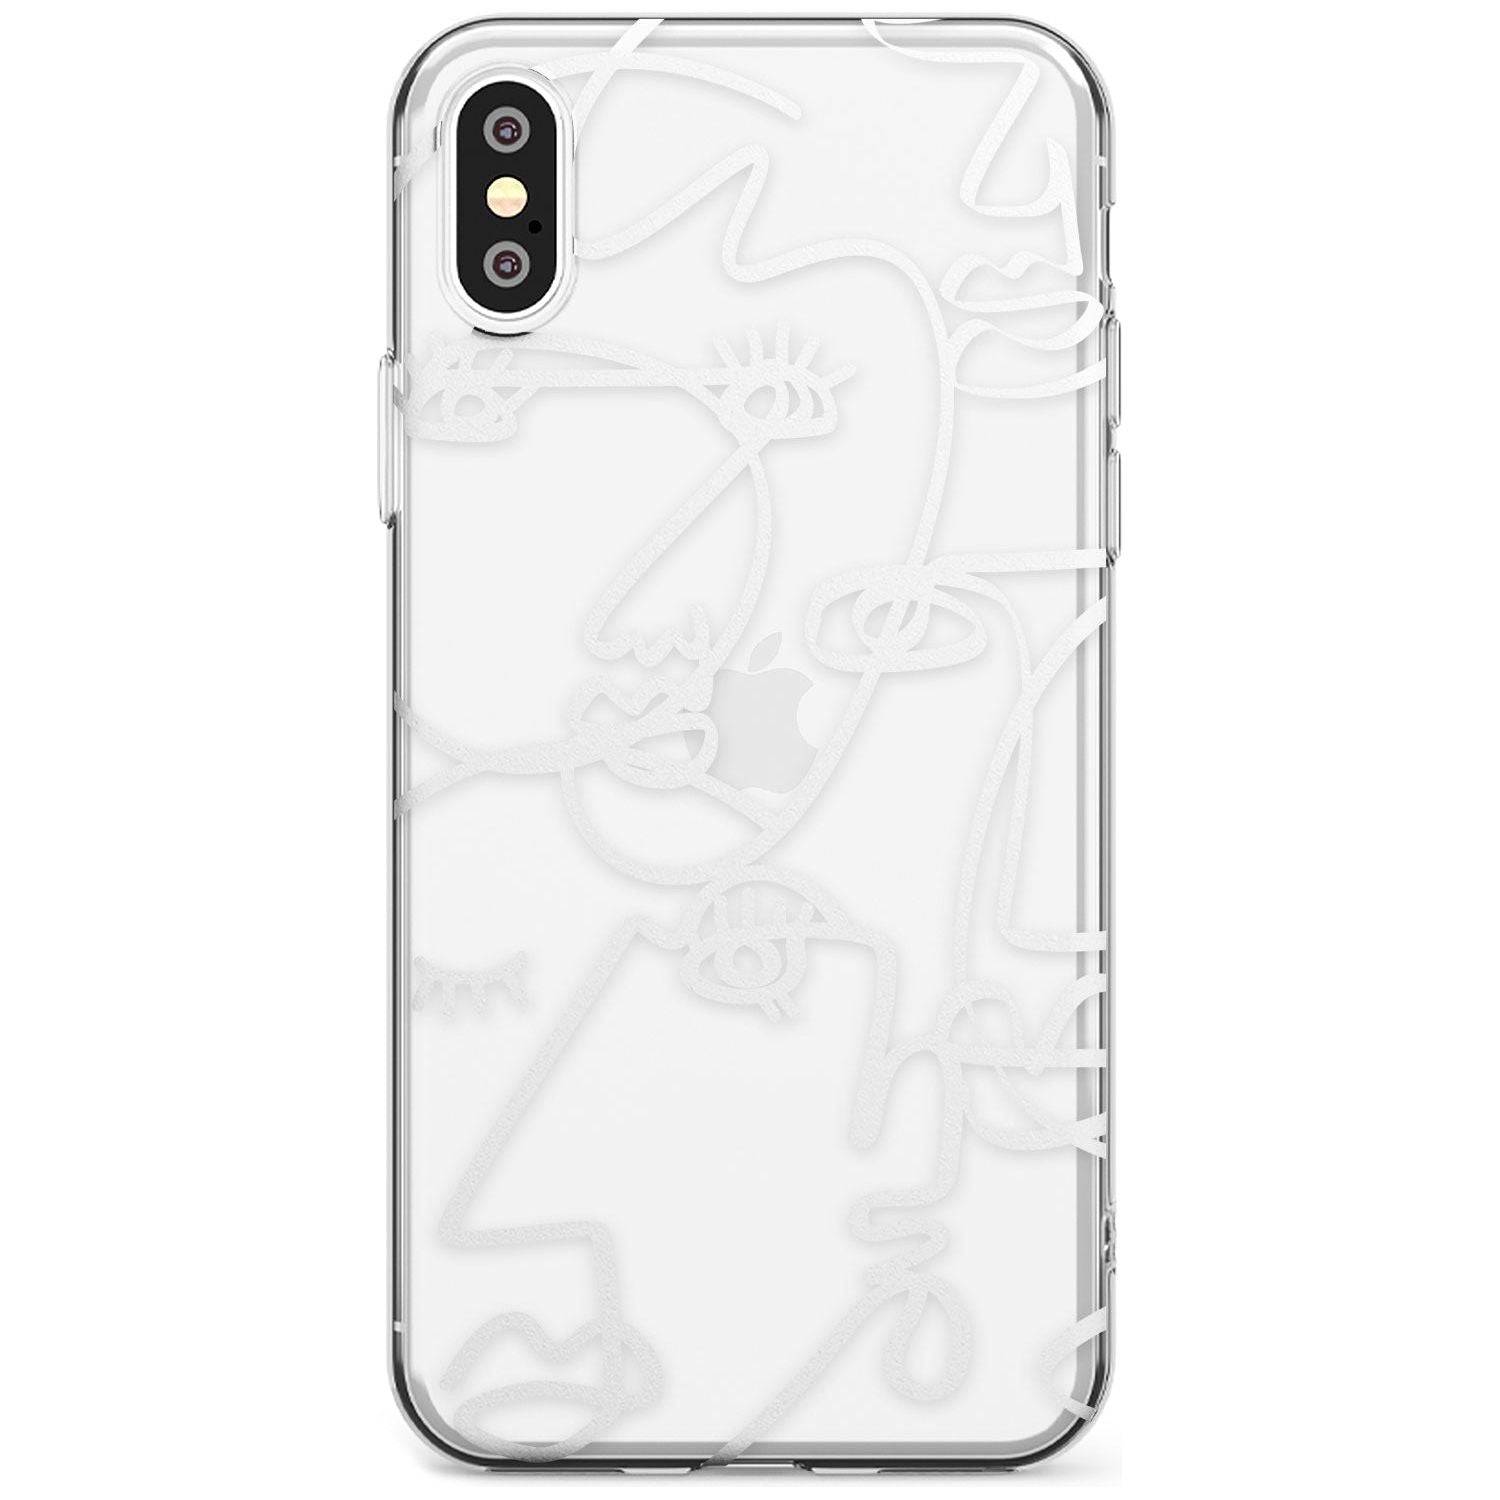 Continuous Line Faces: White on Clear Black Impact Phone Case for iPhone X XS Max XR